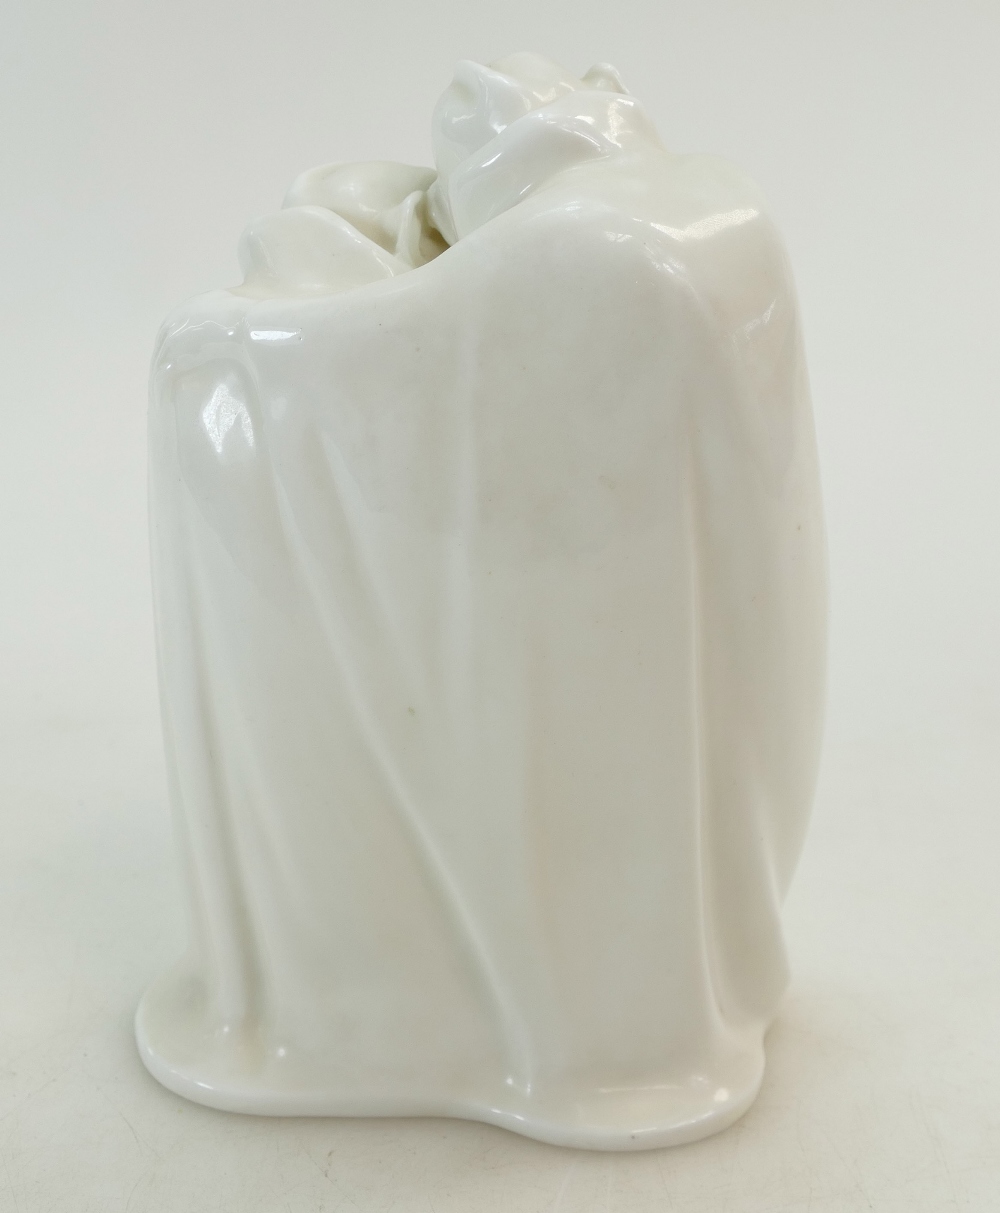 Rare Royal Doulton figure Double Spook in a glazed white colourway, - Image 3 of 3